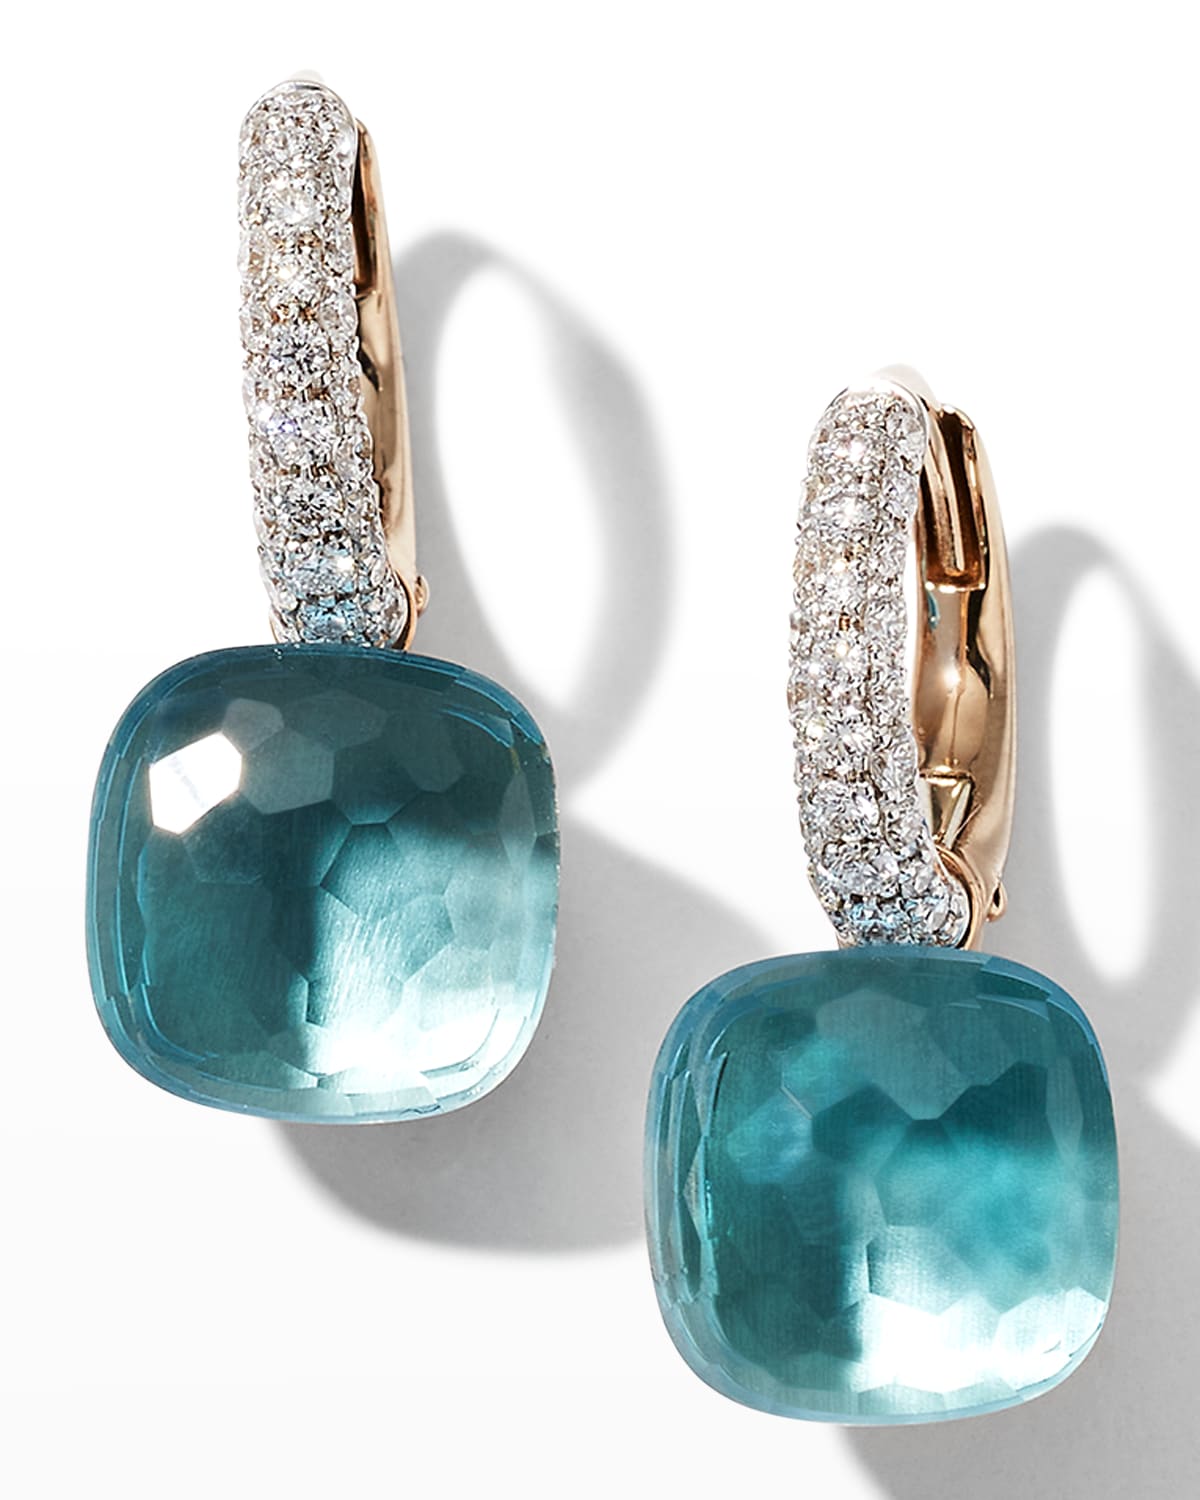 Nudo White Gold and Rose Gold Earrings with Diamonds and Blue Topaz